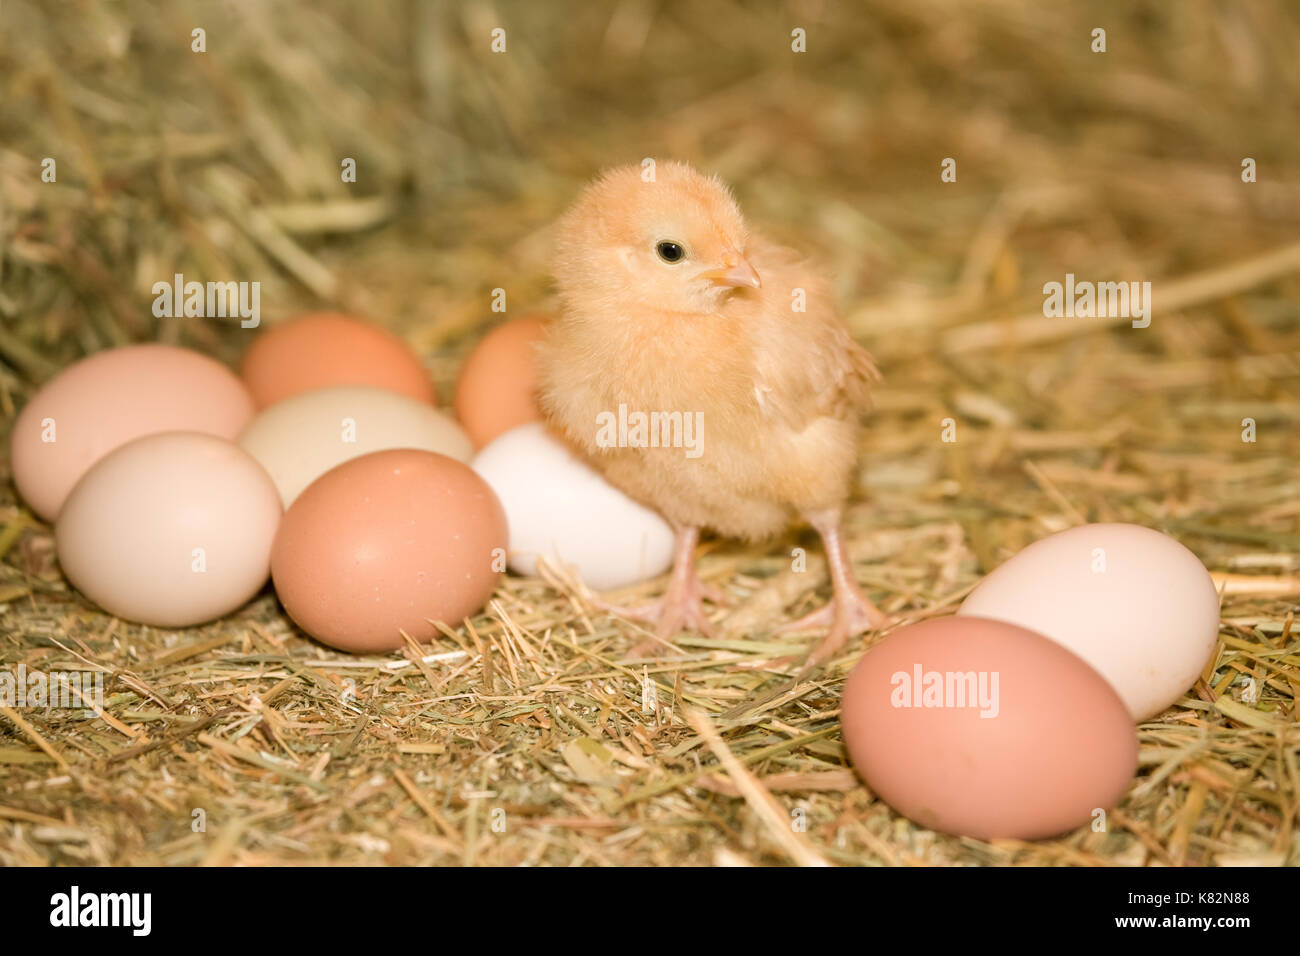 Buff Orpington chick standing beside eggs of various colors, at Baxtor Barn farm in Fall City, Washington, USA Stock Photo